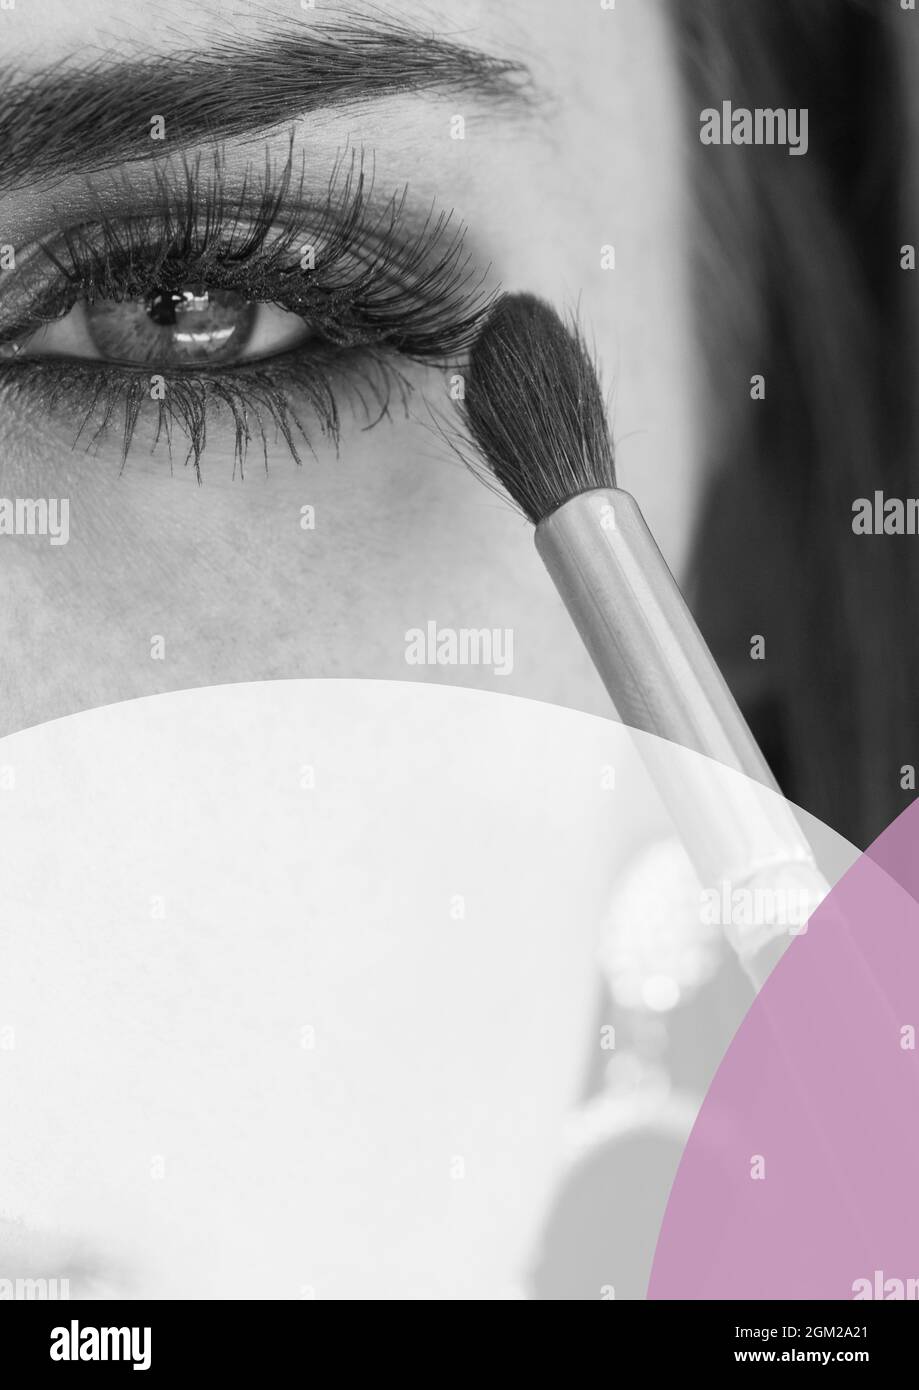 Purple and white banner with copy space against close up of woman doing eye makeup Stock Photo